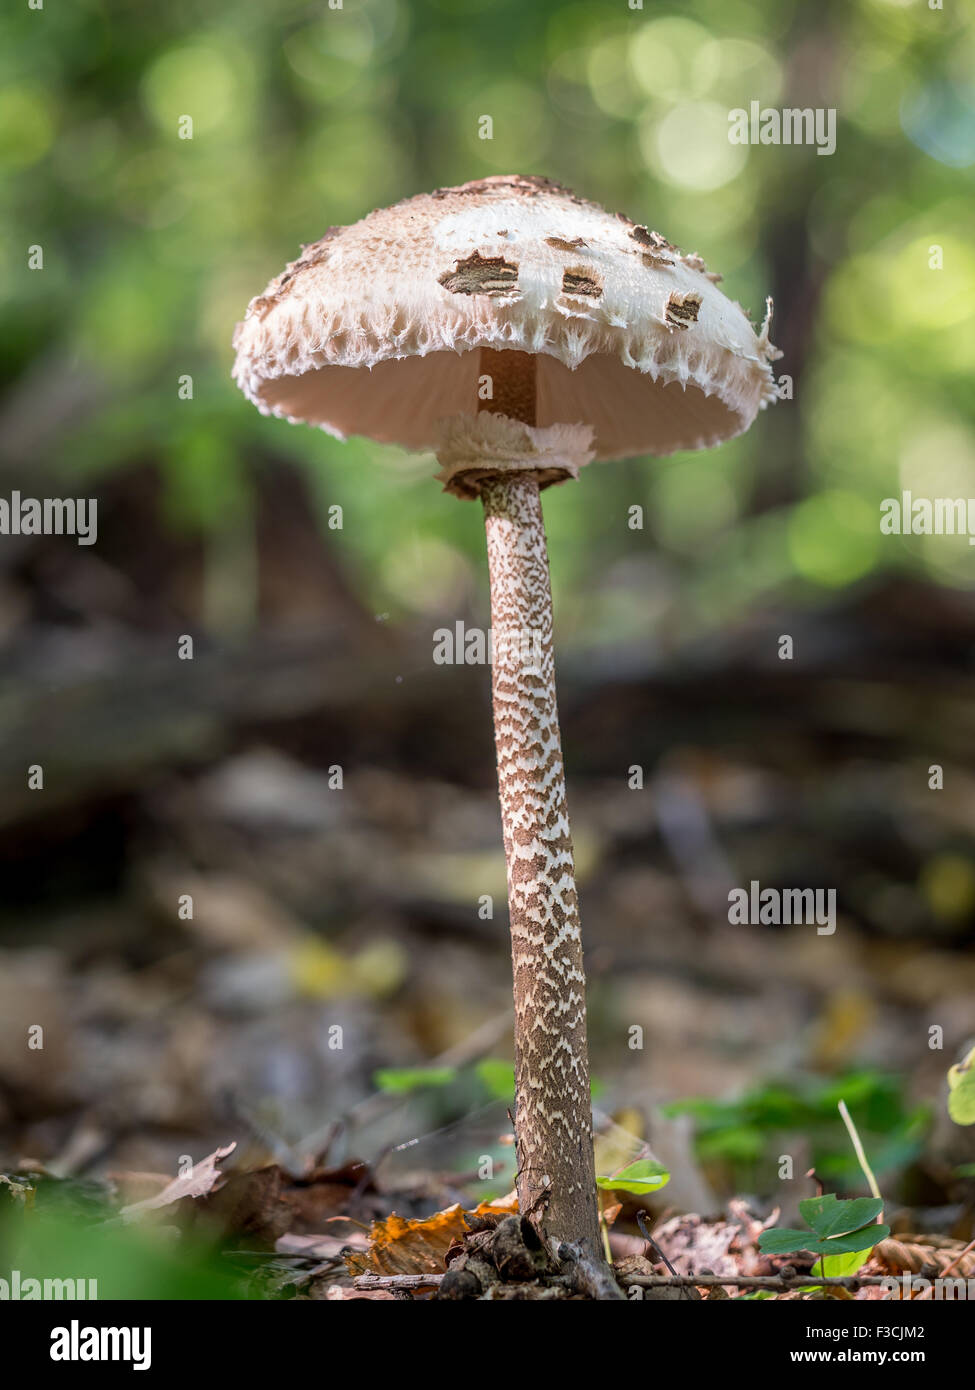 Parasol Fungus mushroom growing in the forest Stock Photo